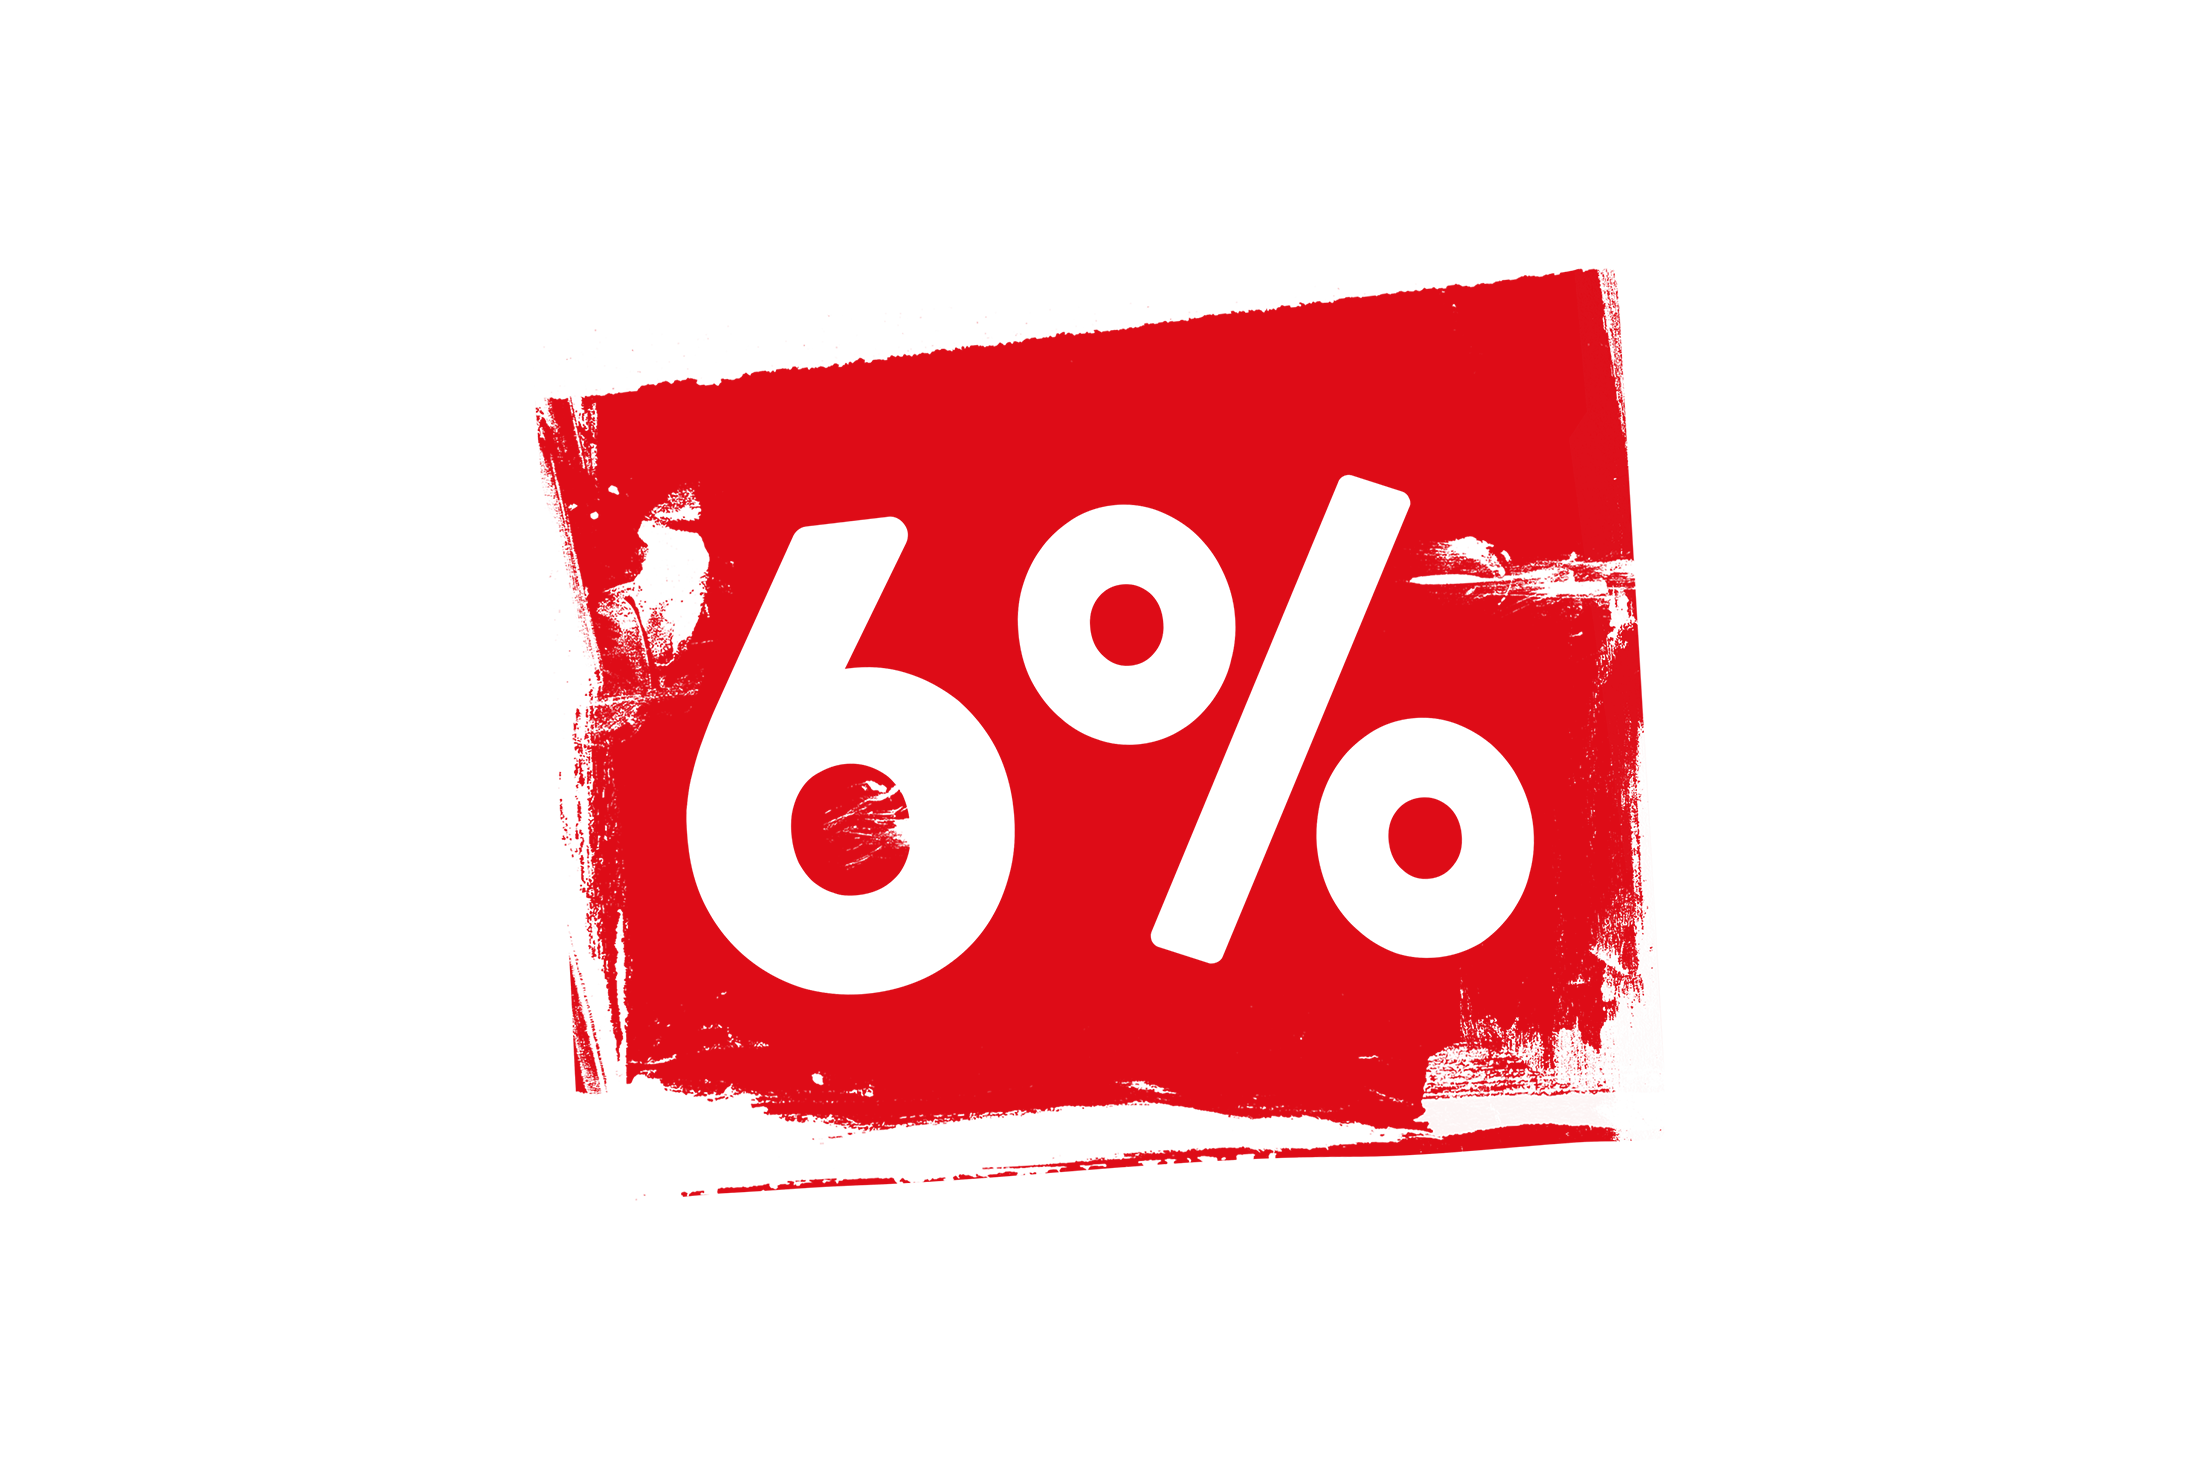 Grunge 6 percent label PNG and PSD